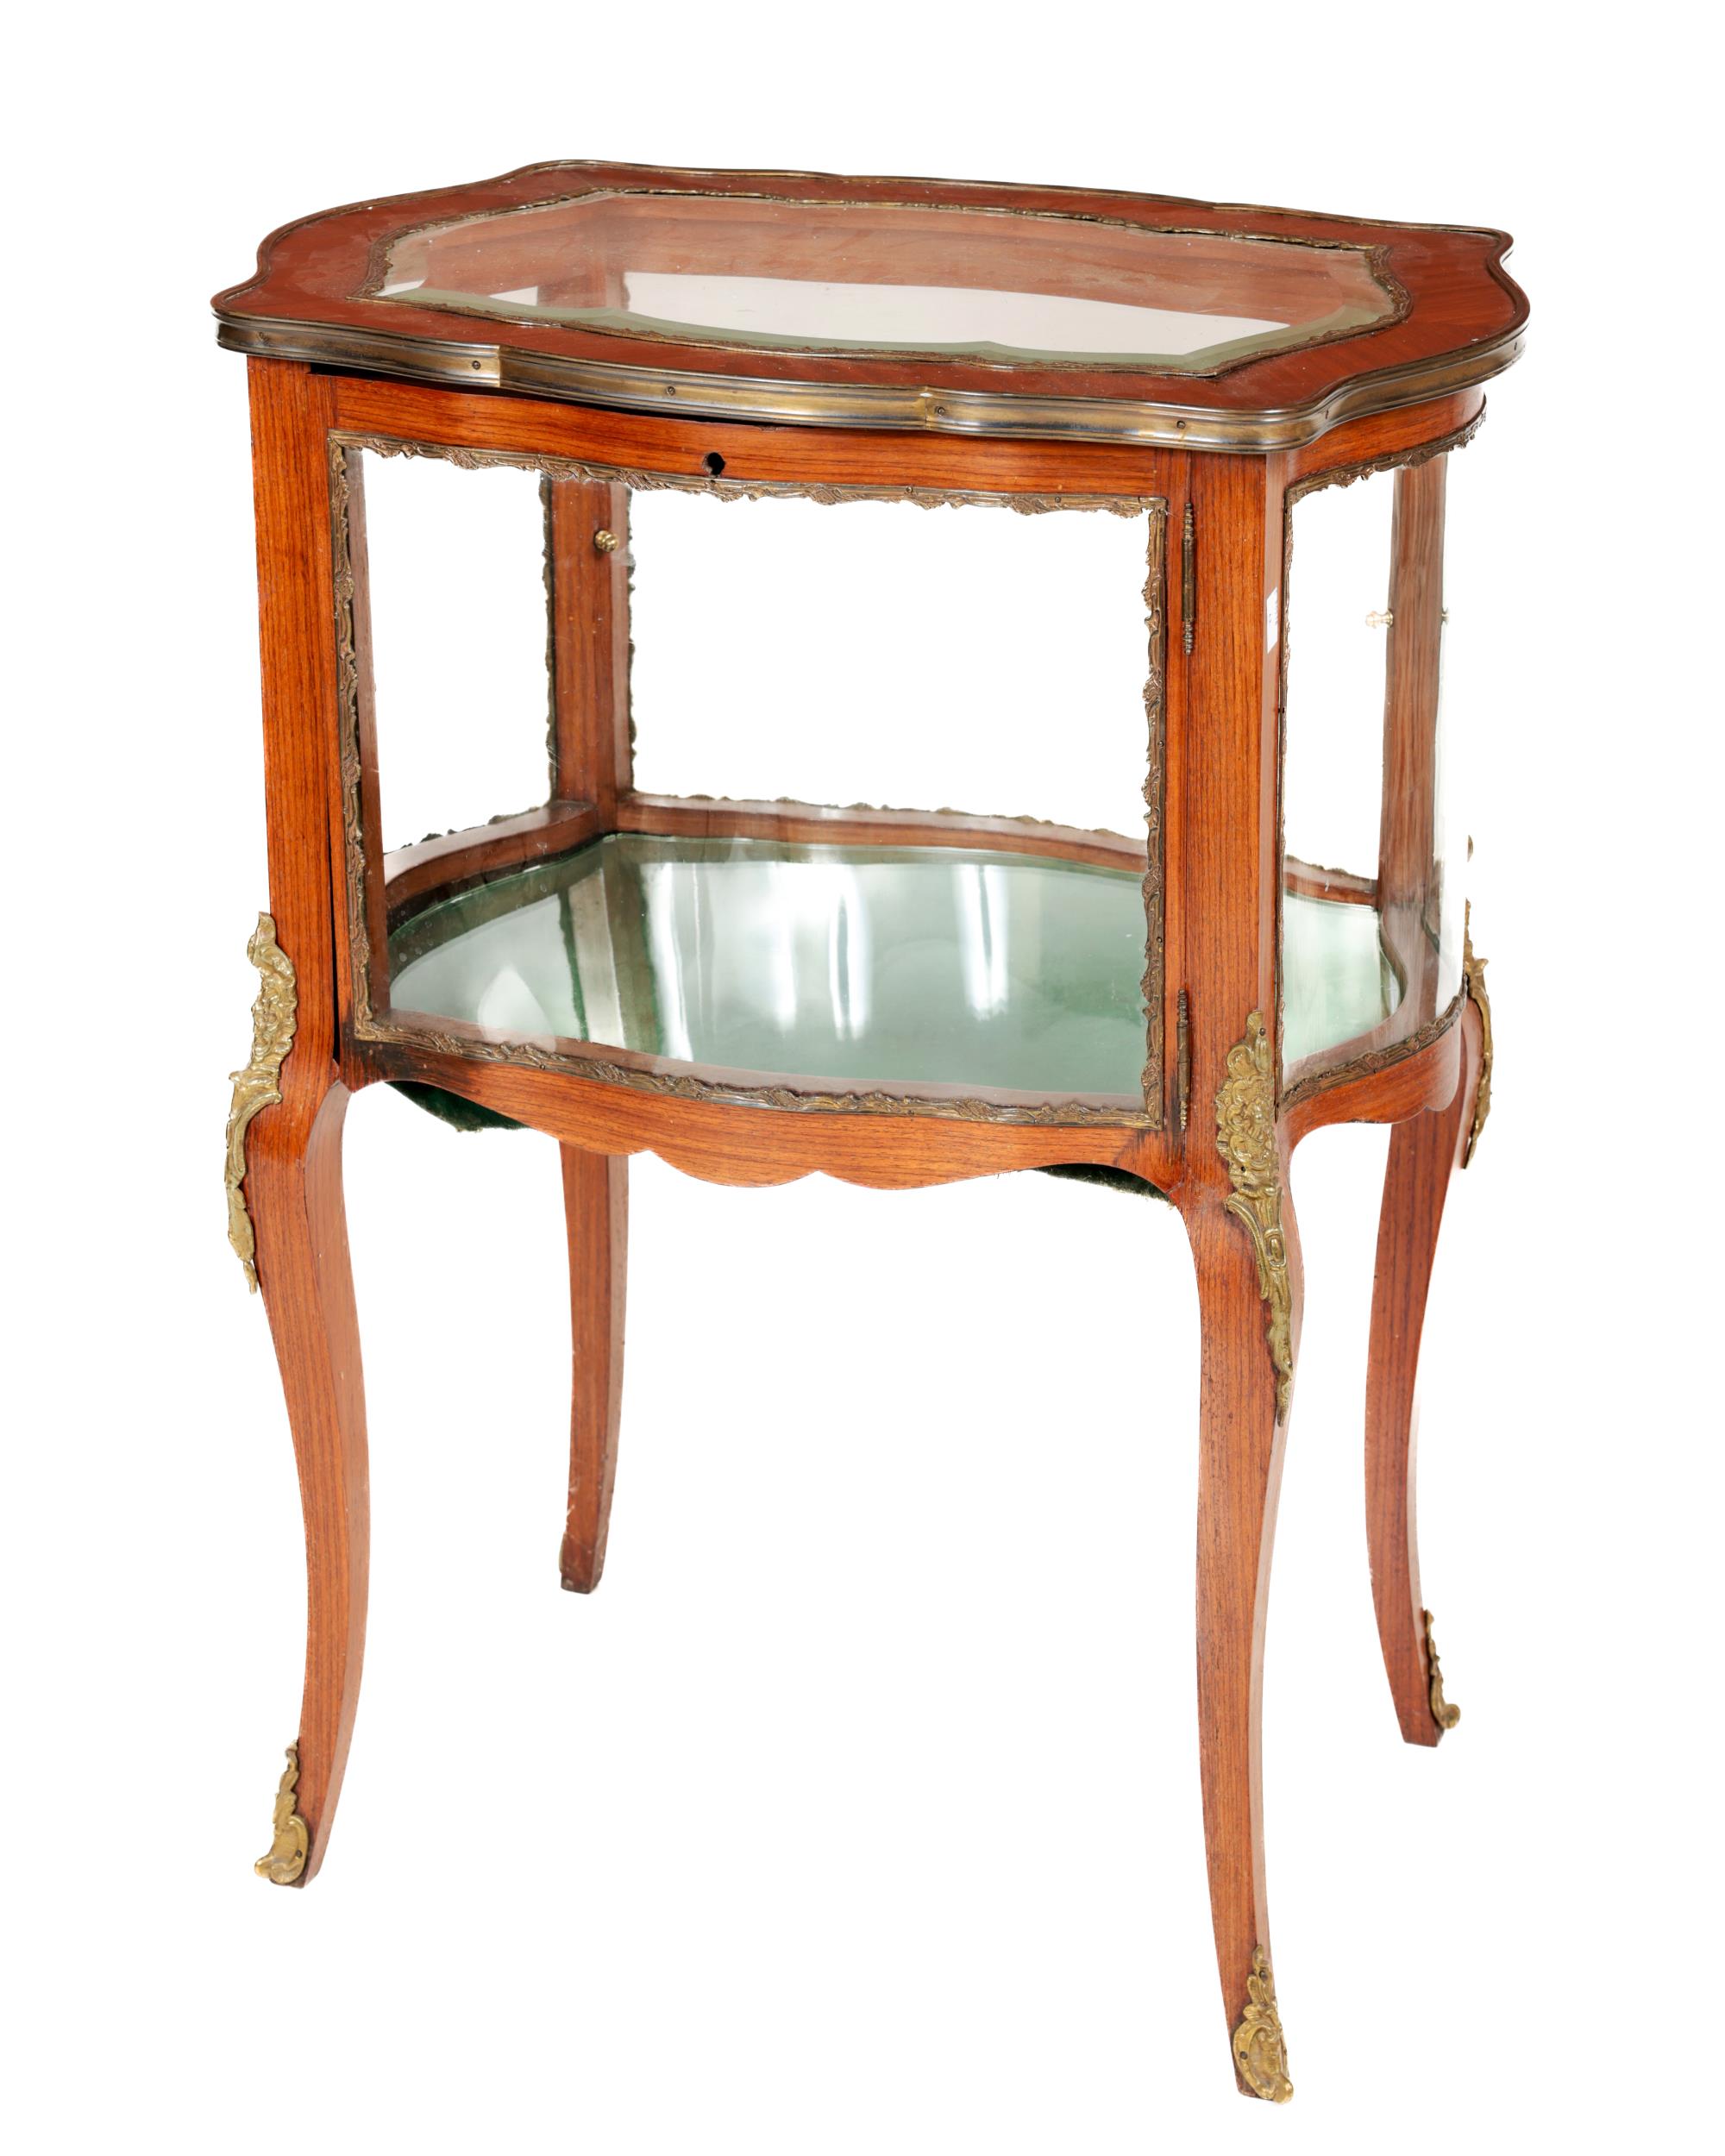 A fine quality French style kingwood Display Cabinet, the shaped top with panelled glass, ormolu